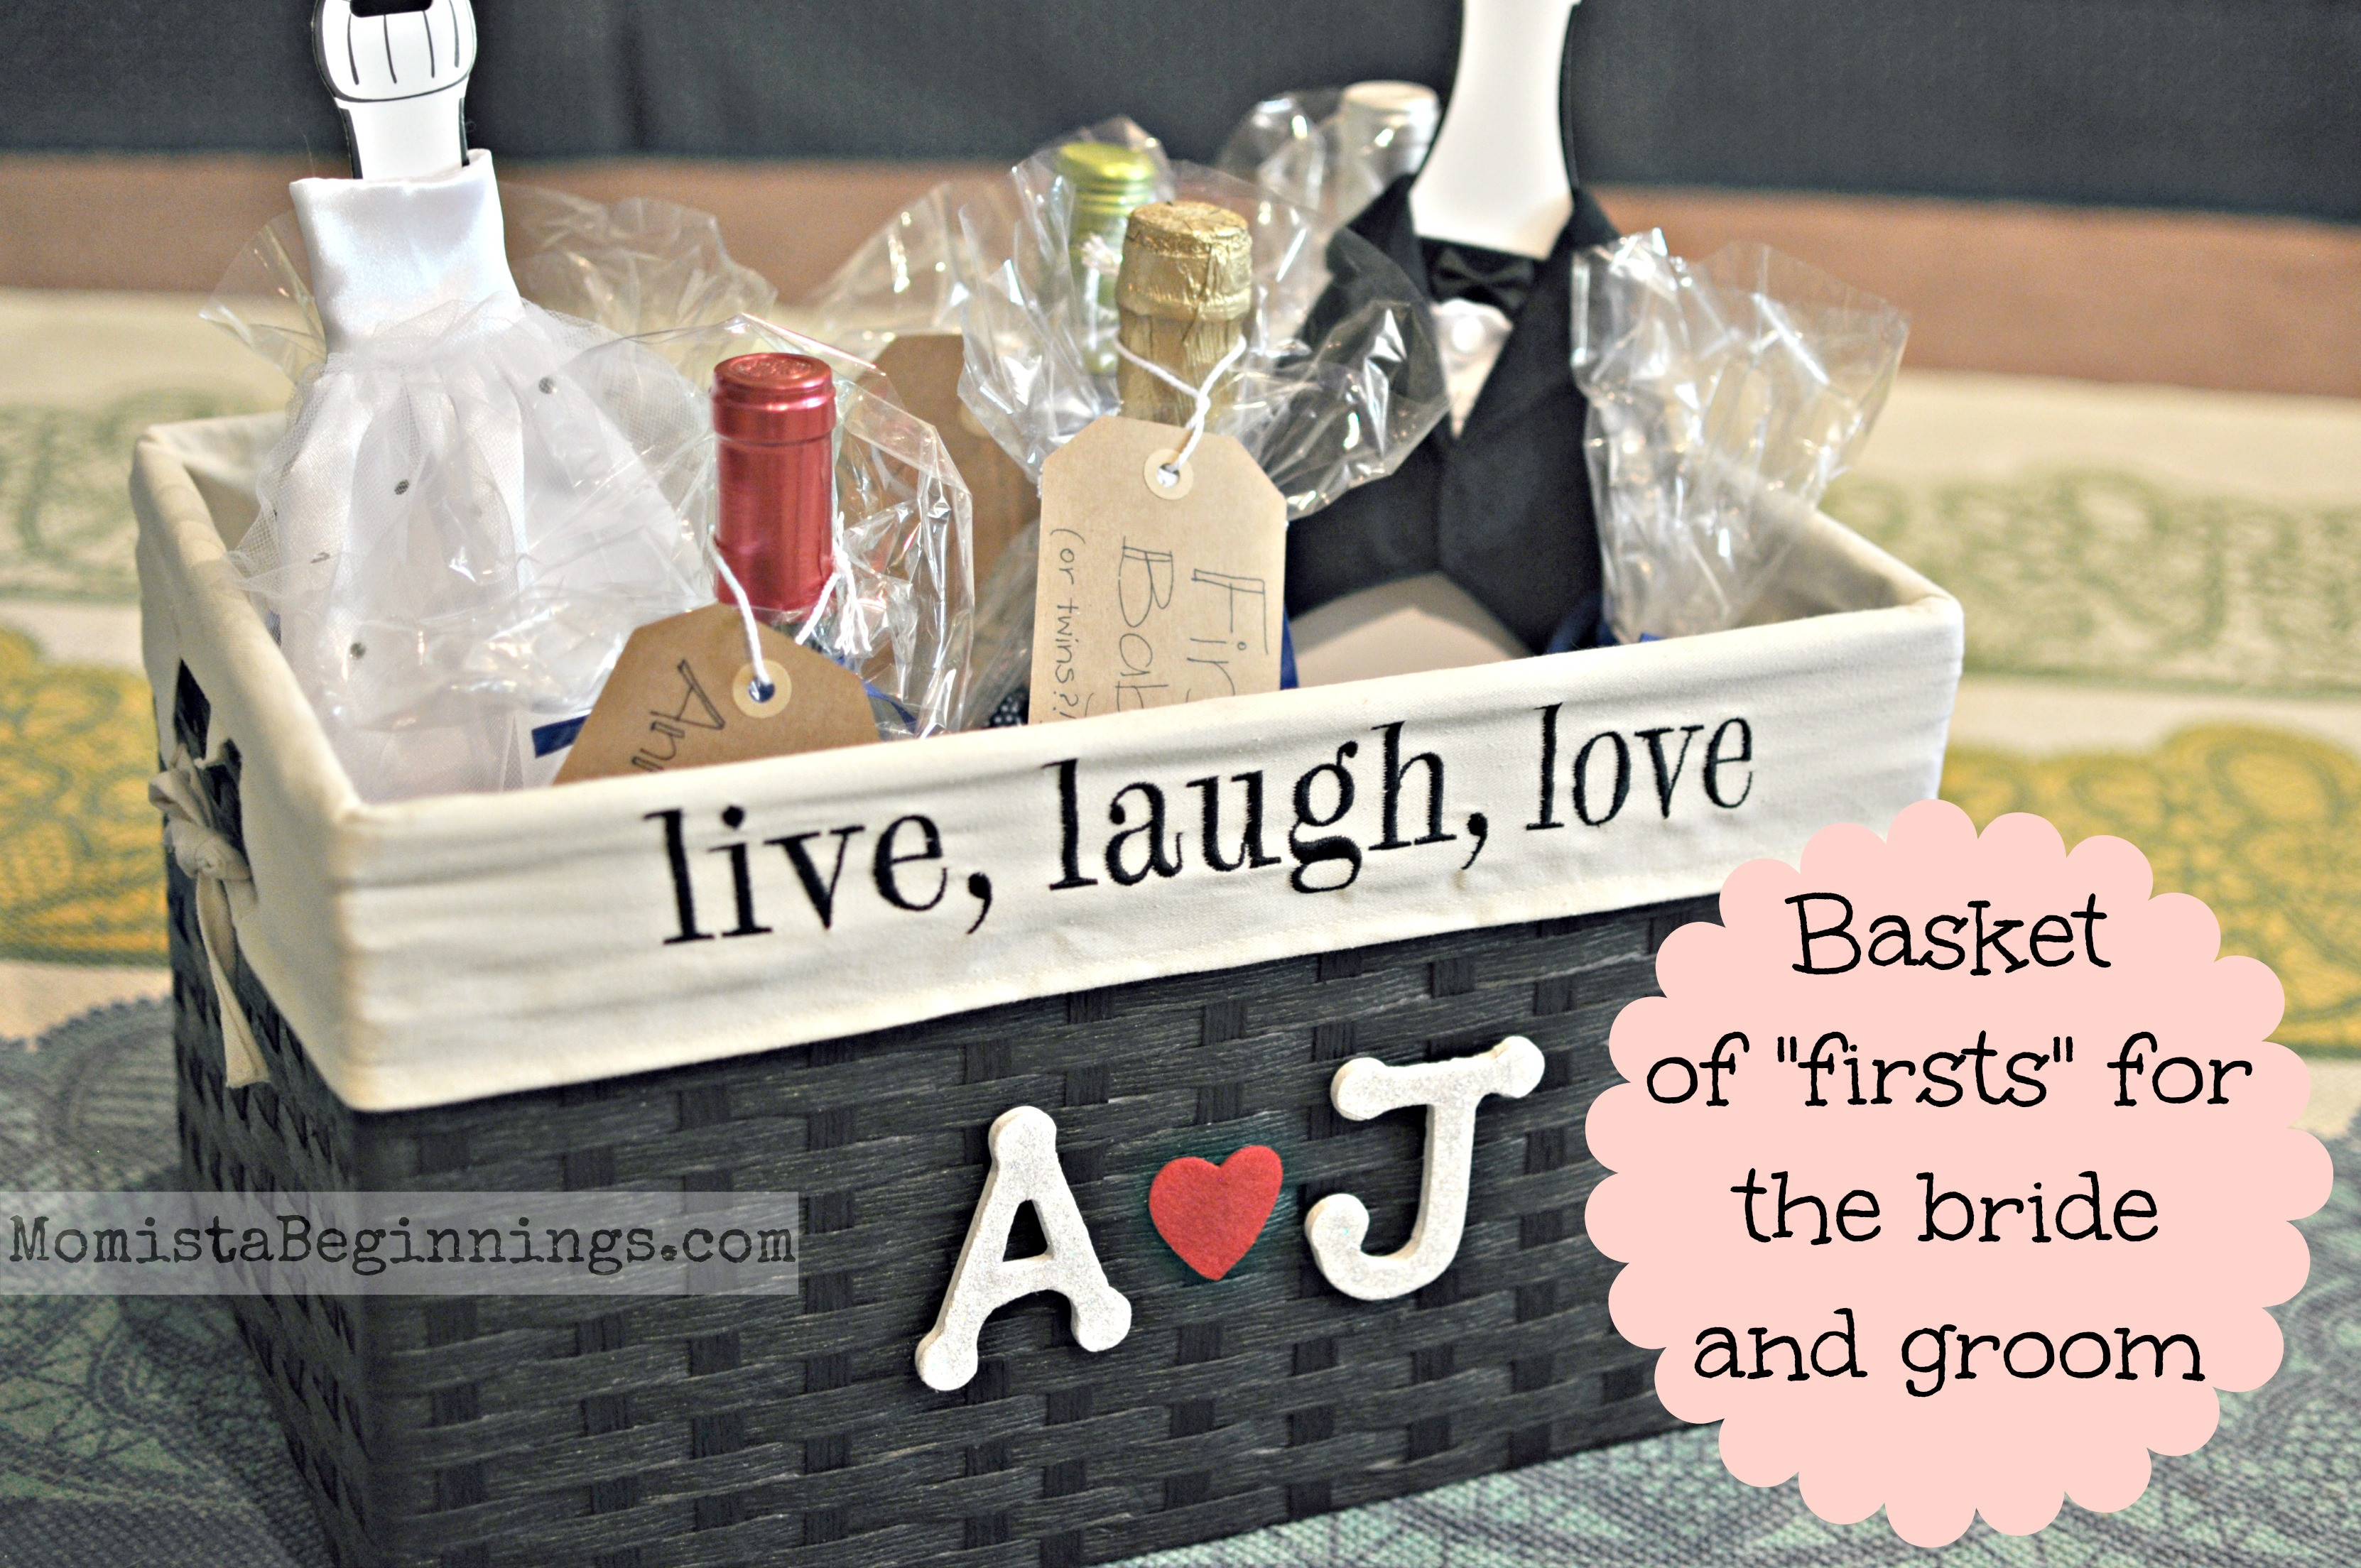 Wedding Gift Ideas For Bride And Groom
 Basket of "Firsts" for the Bride and Groom DIY Momista